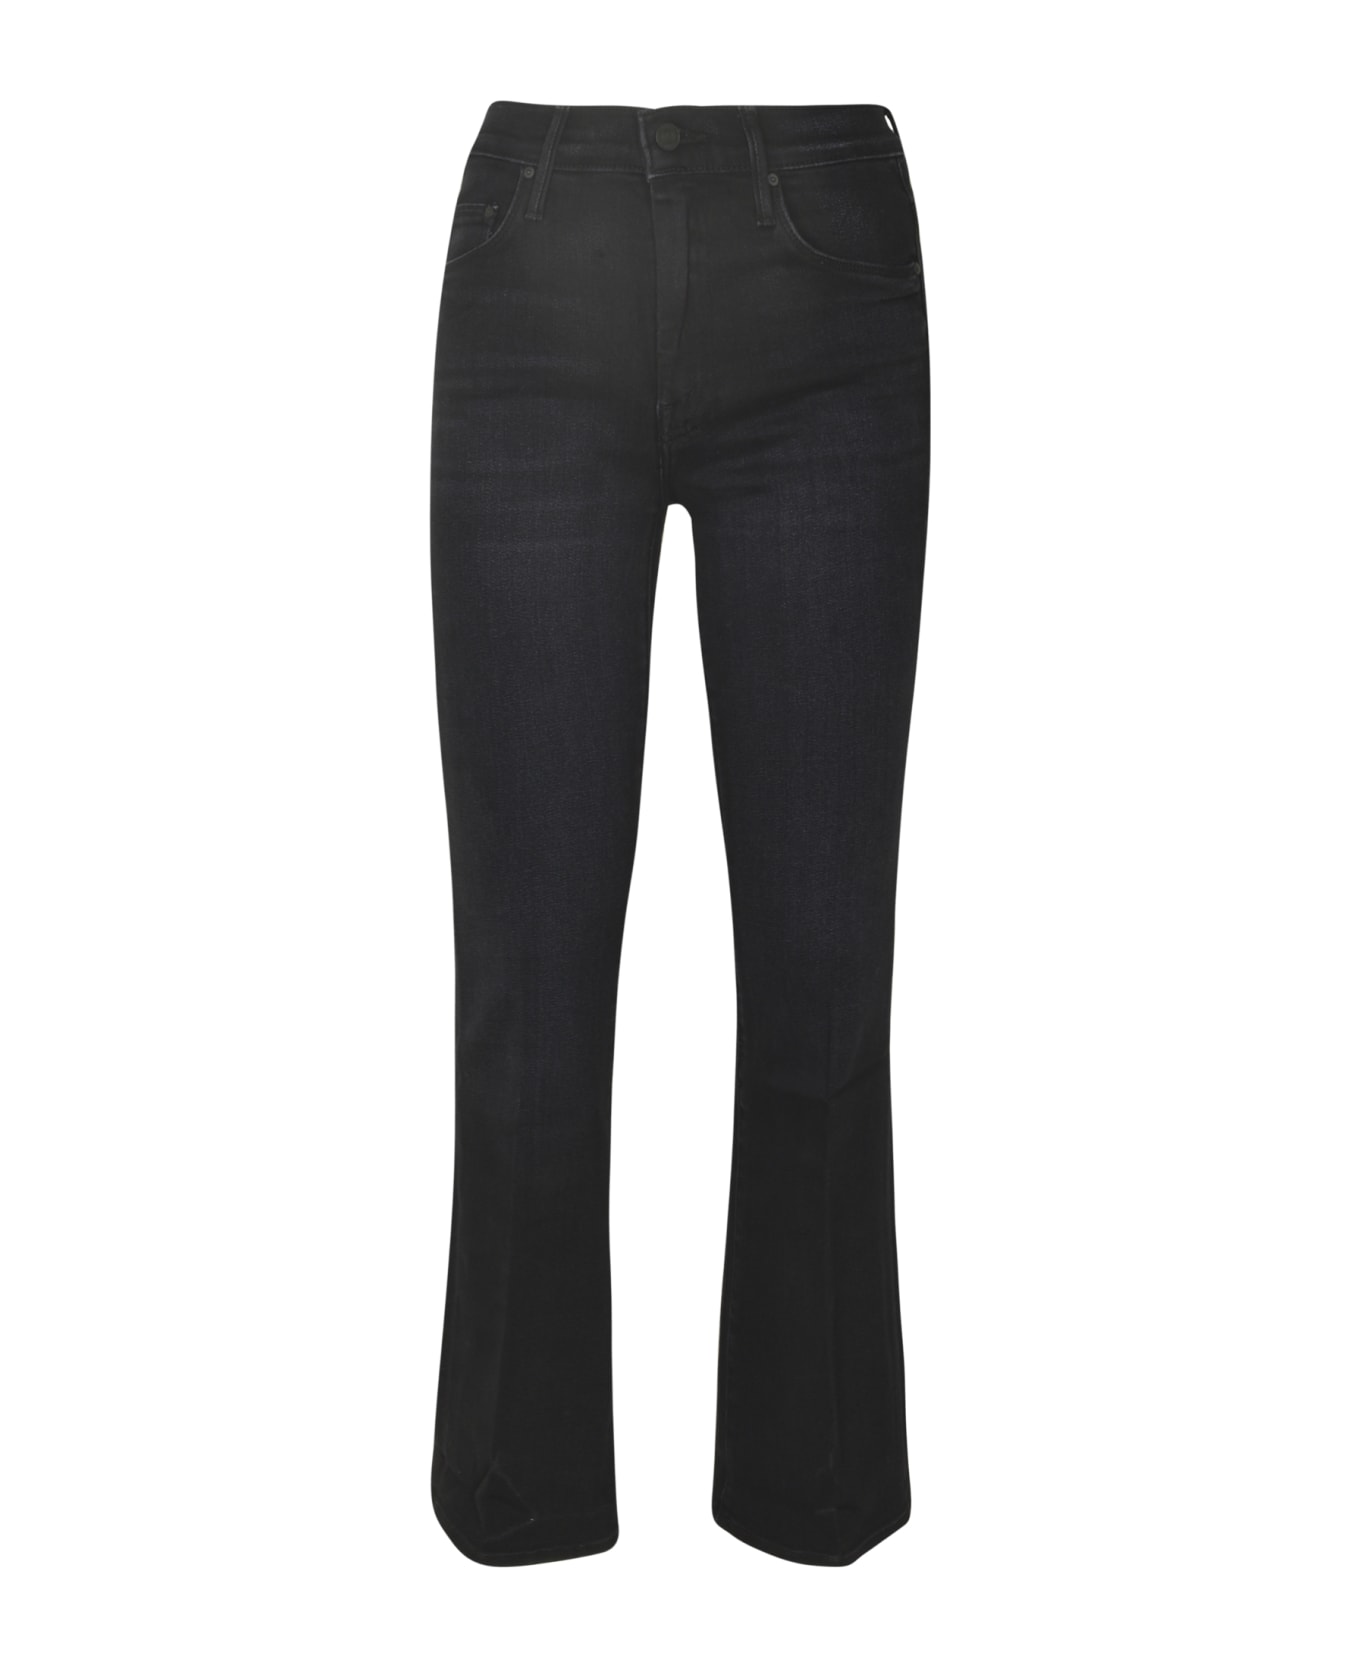 Mother Skinny Fit Buttoned Jeans - Black